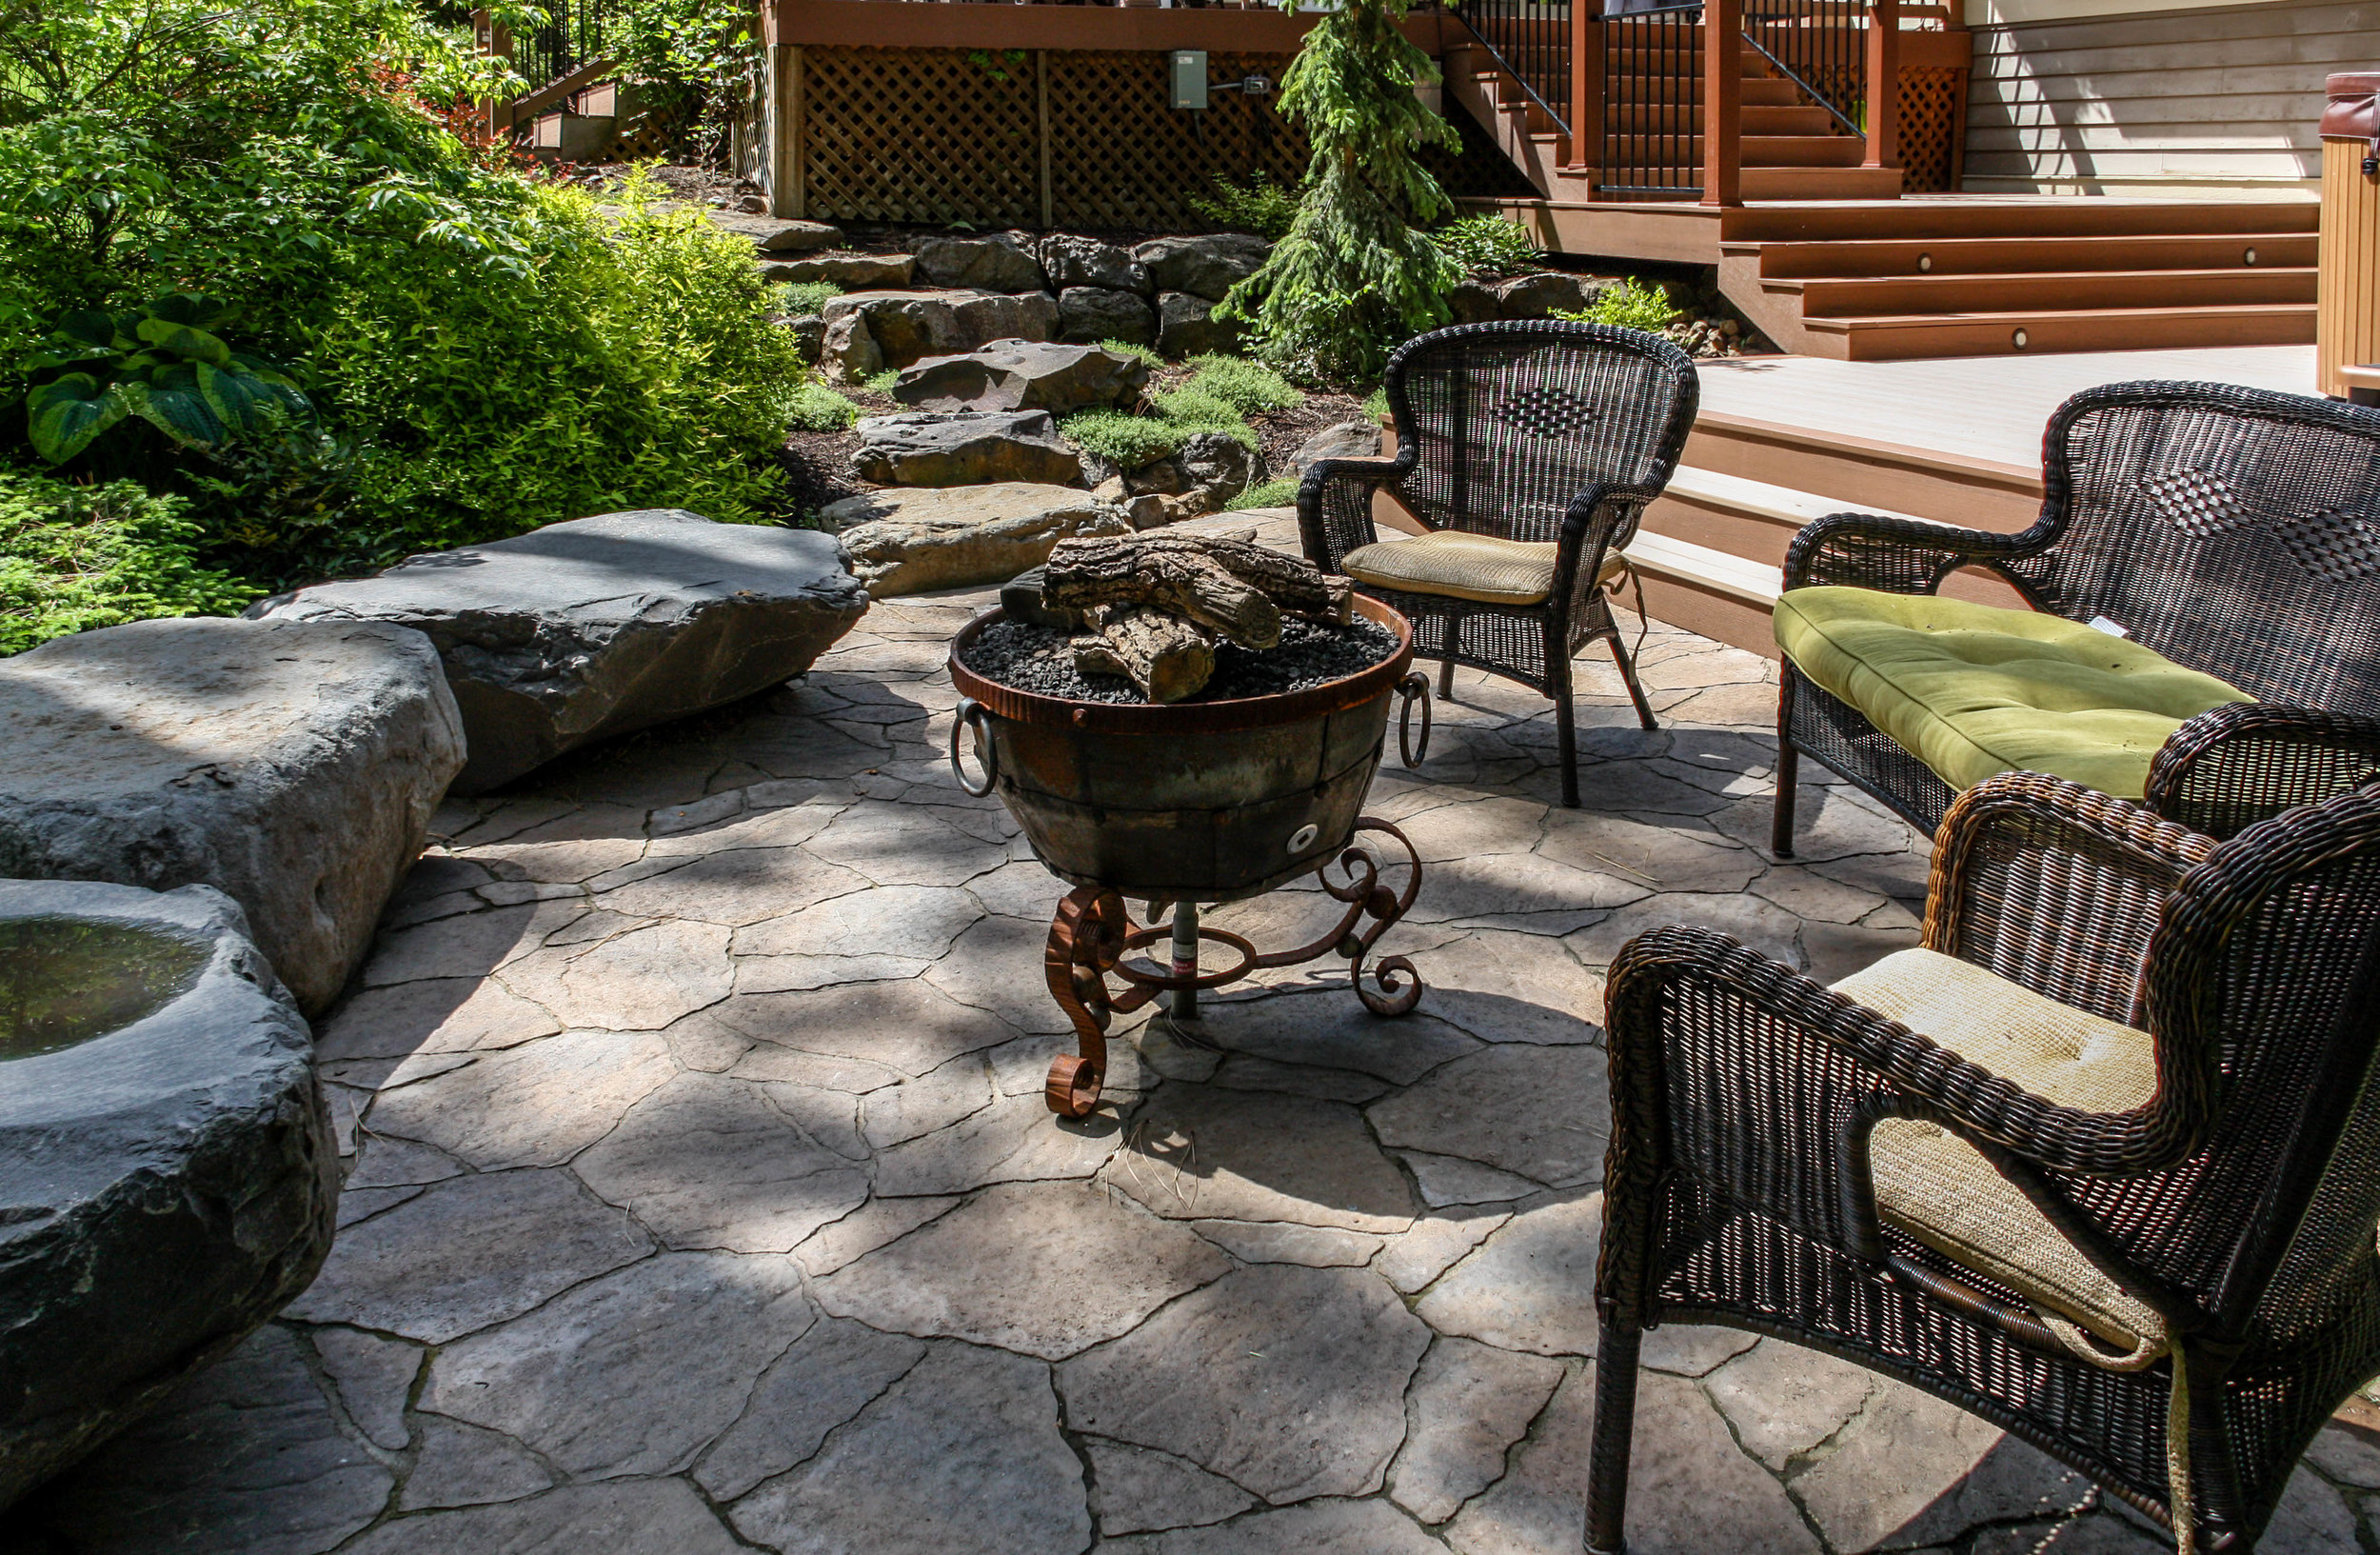 belgard mega arbel patio with fire pit and bench rocks